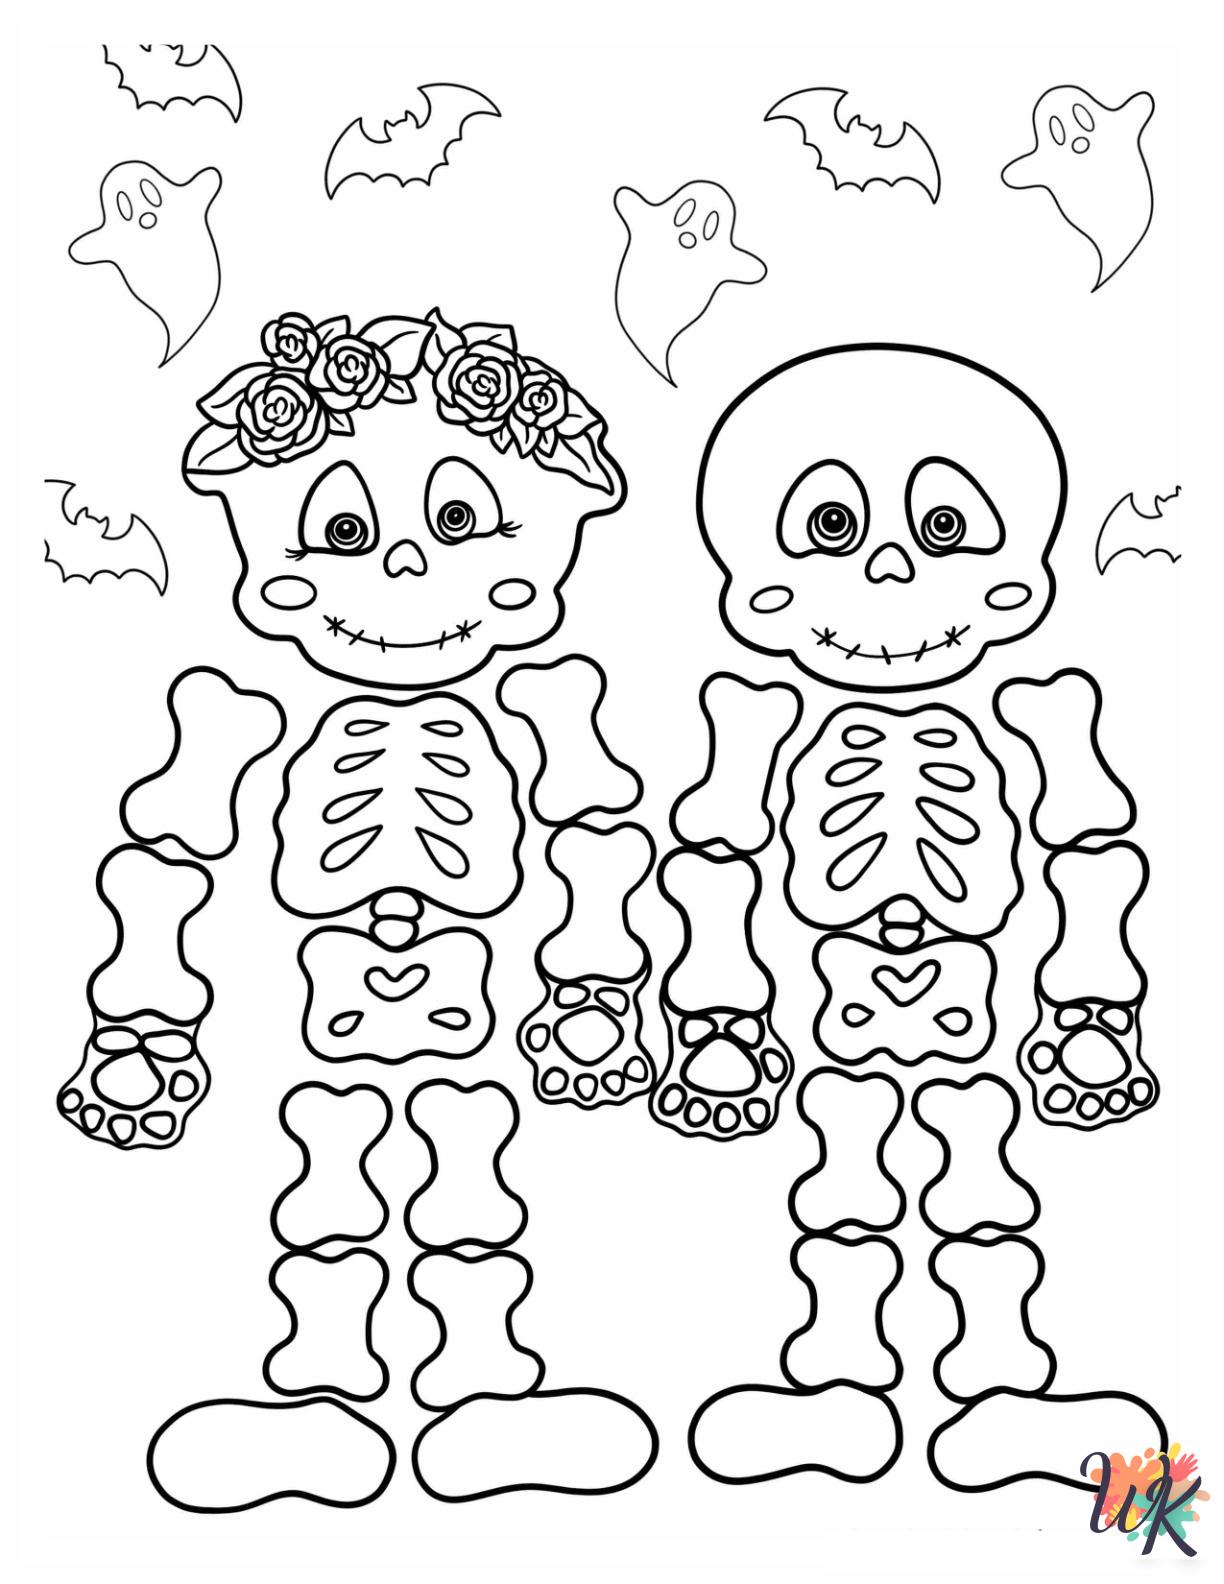 old-fashioned Skeleton coloring pages 1